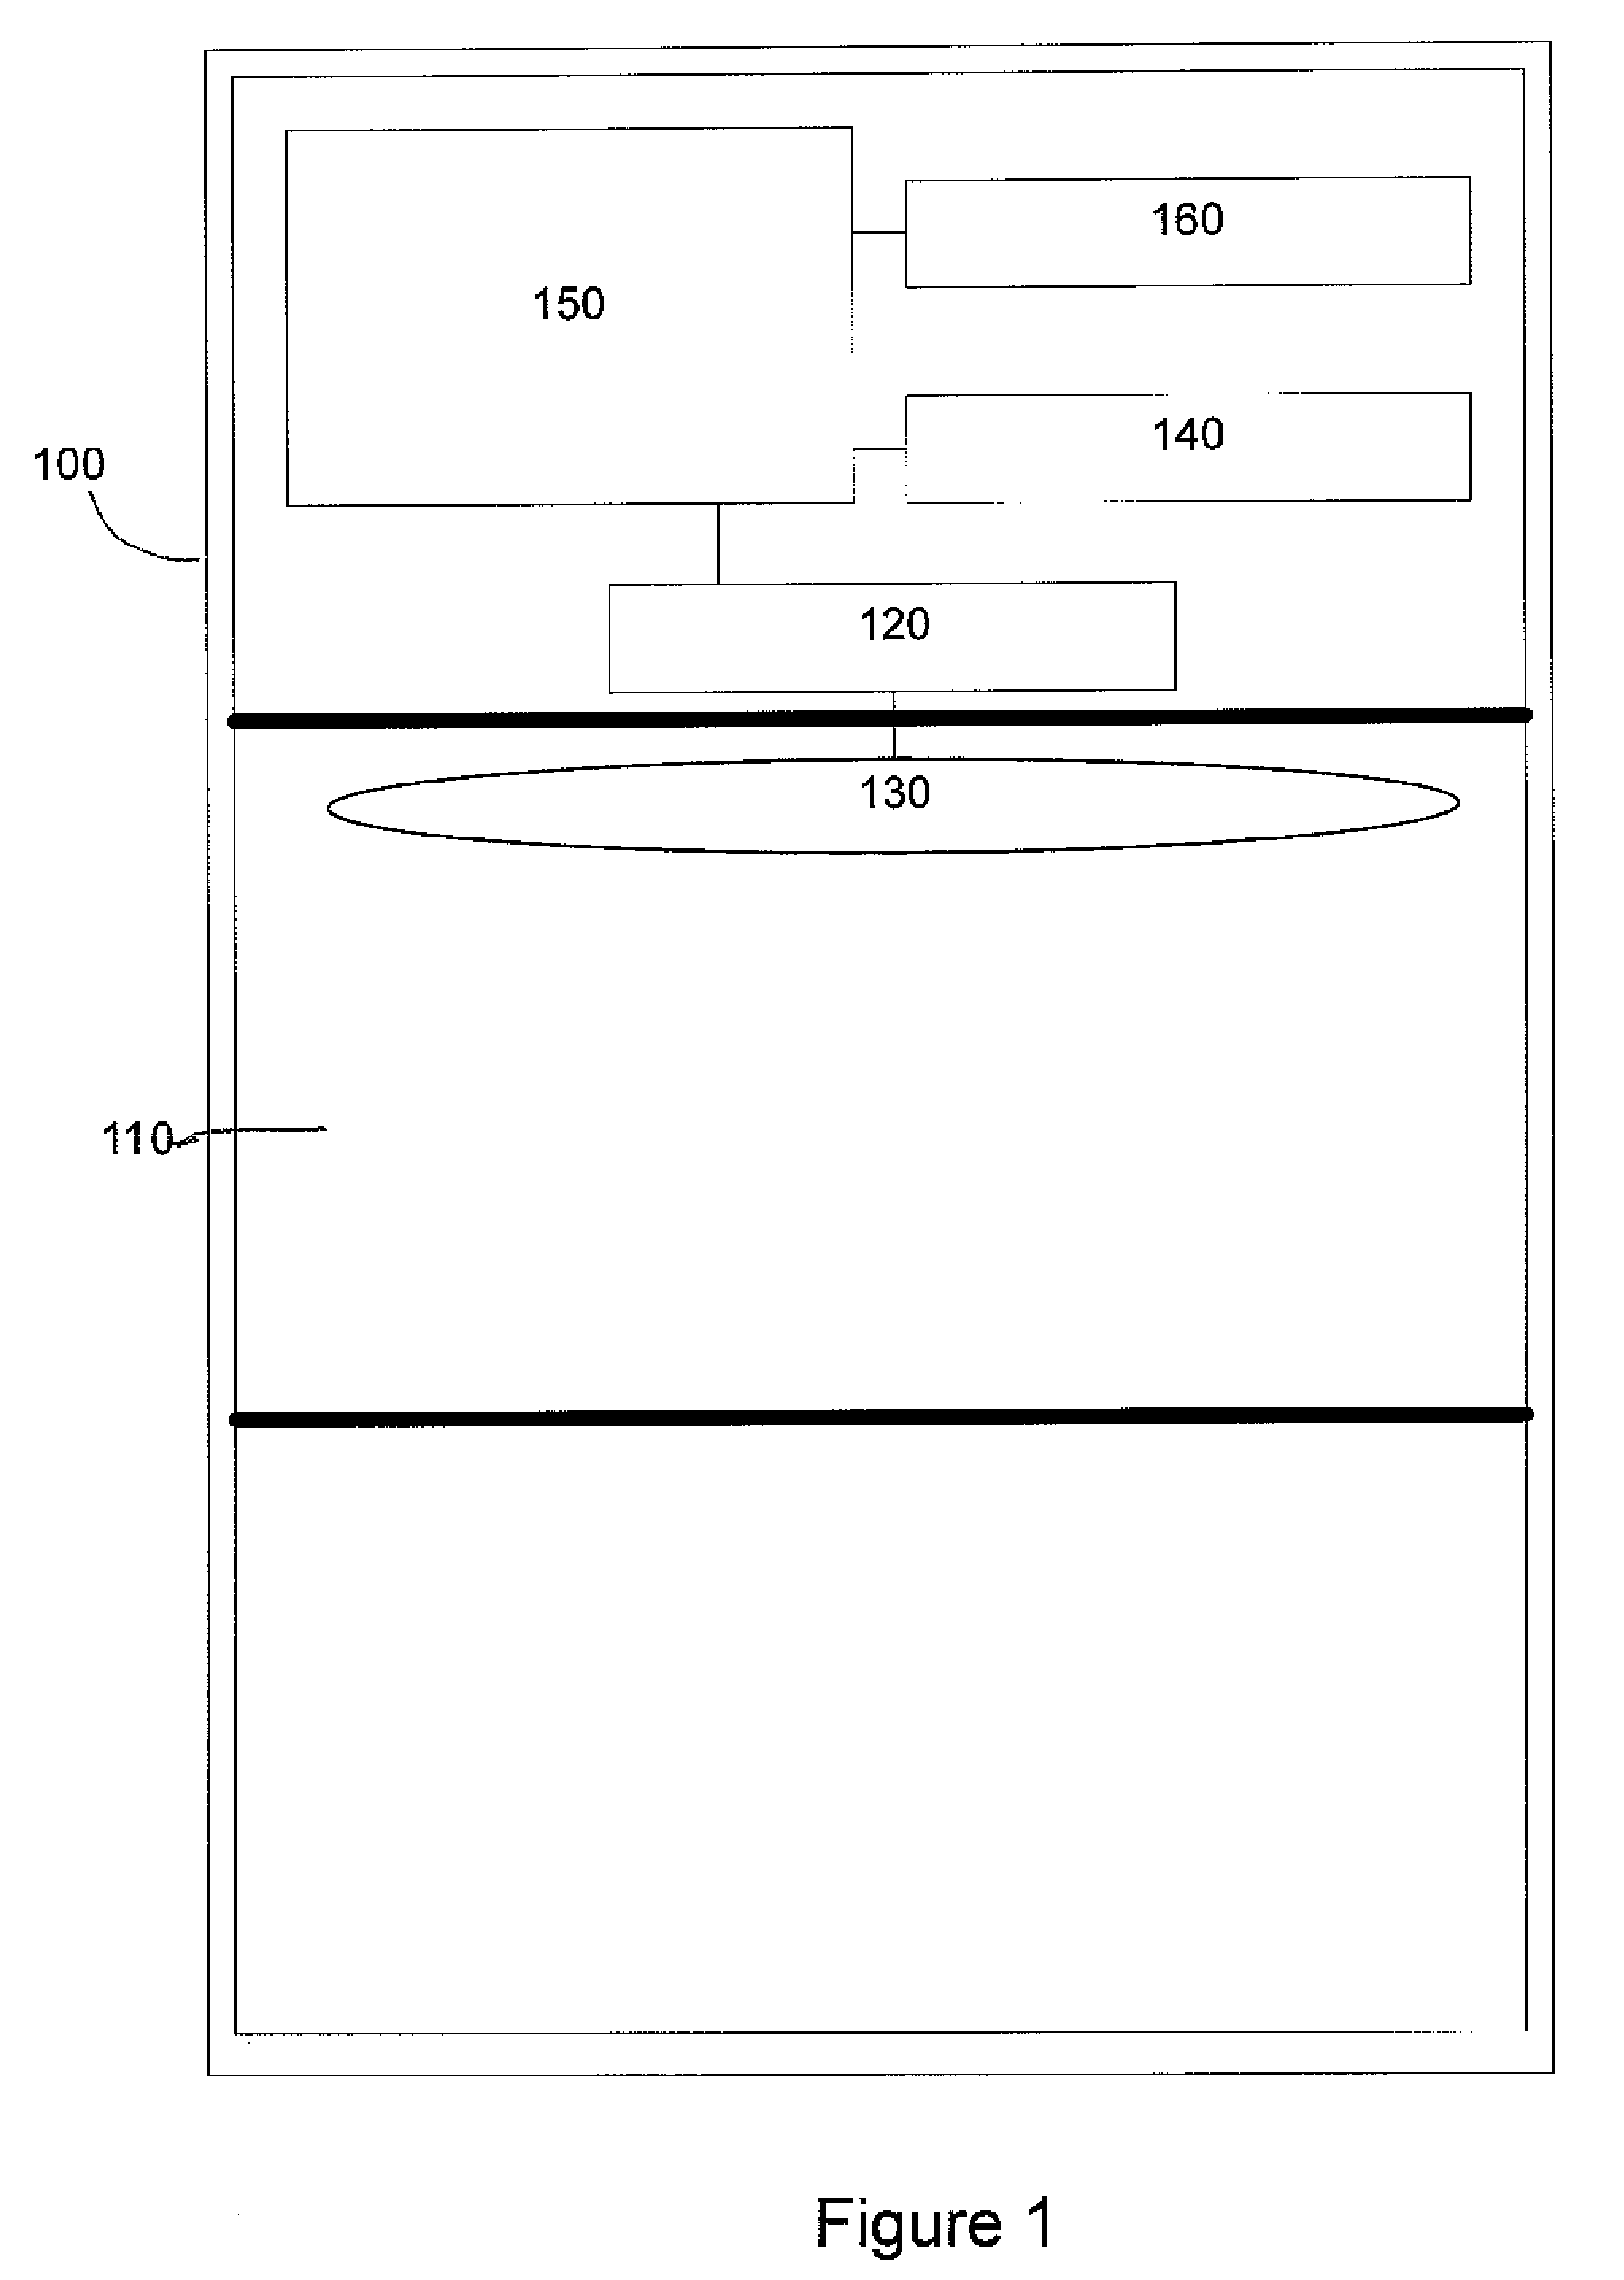 System, method, and apparatus for high value product management and tracking